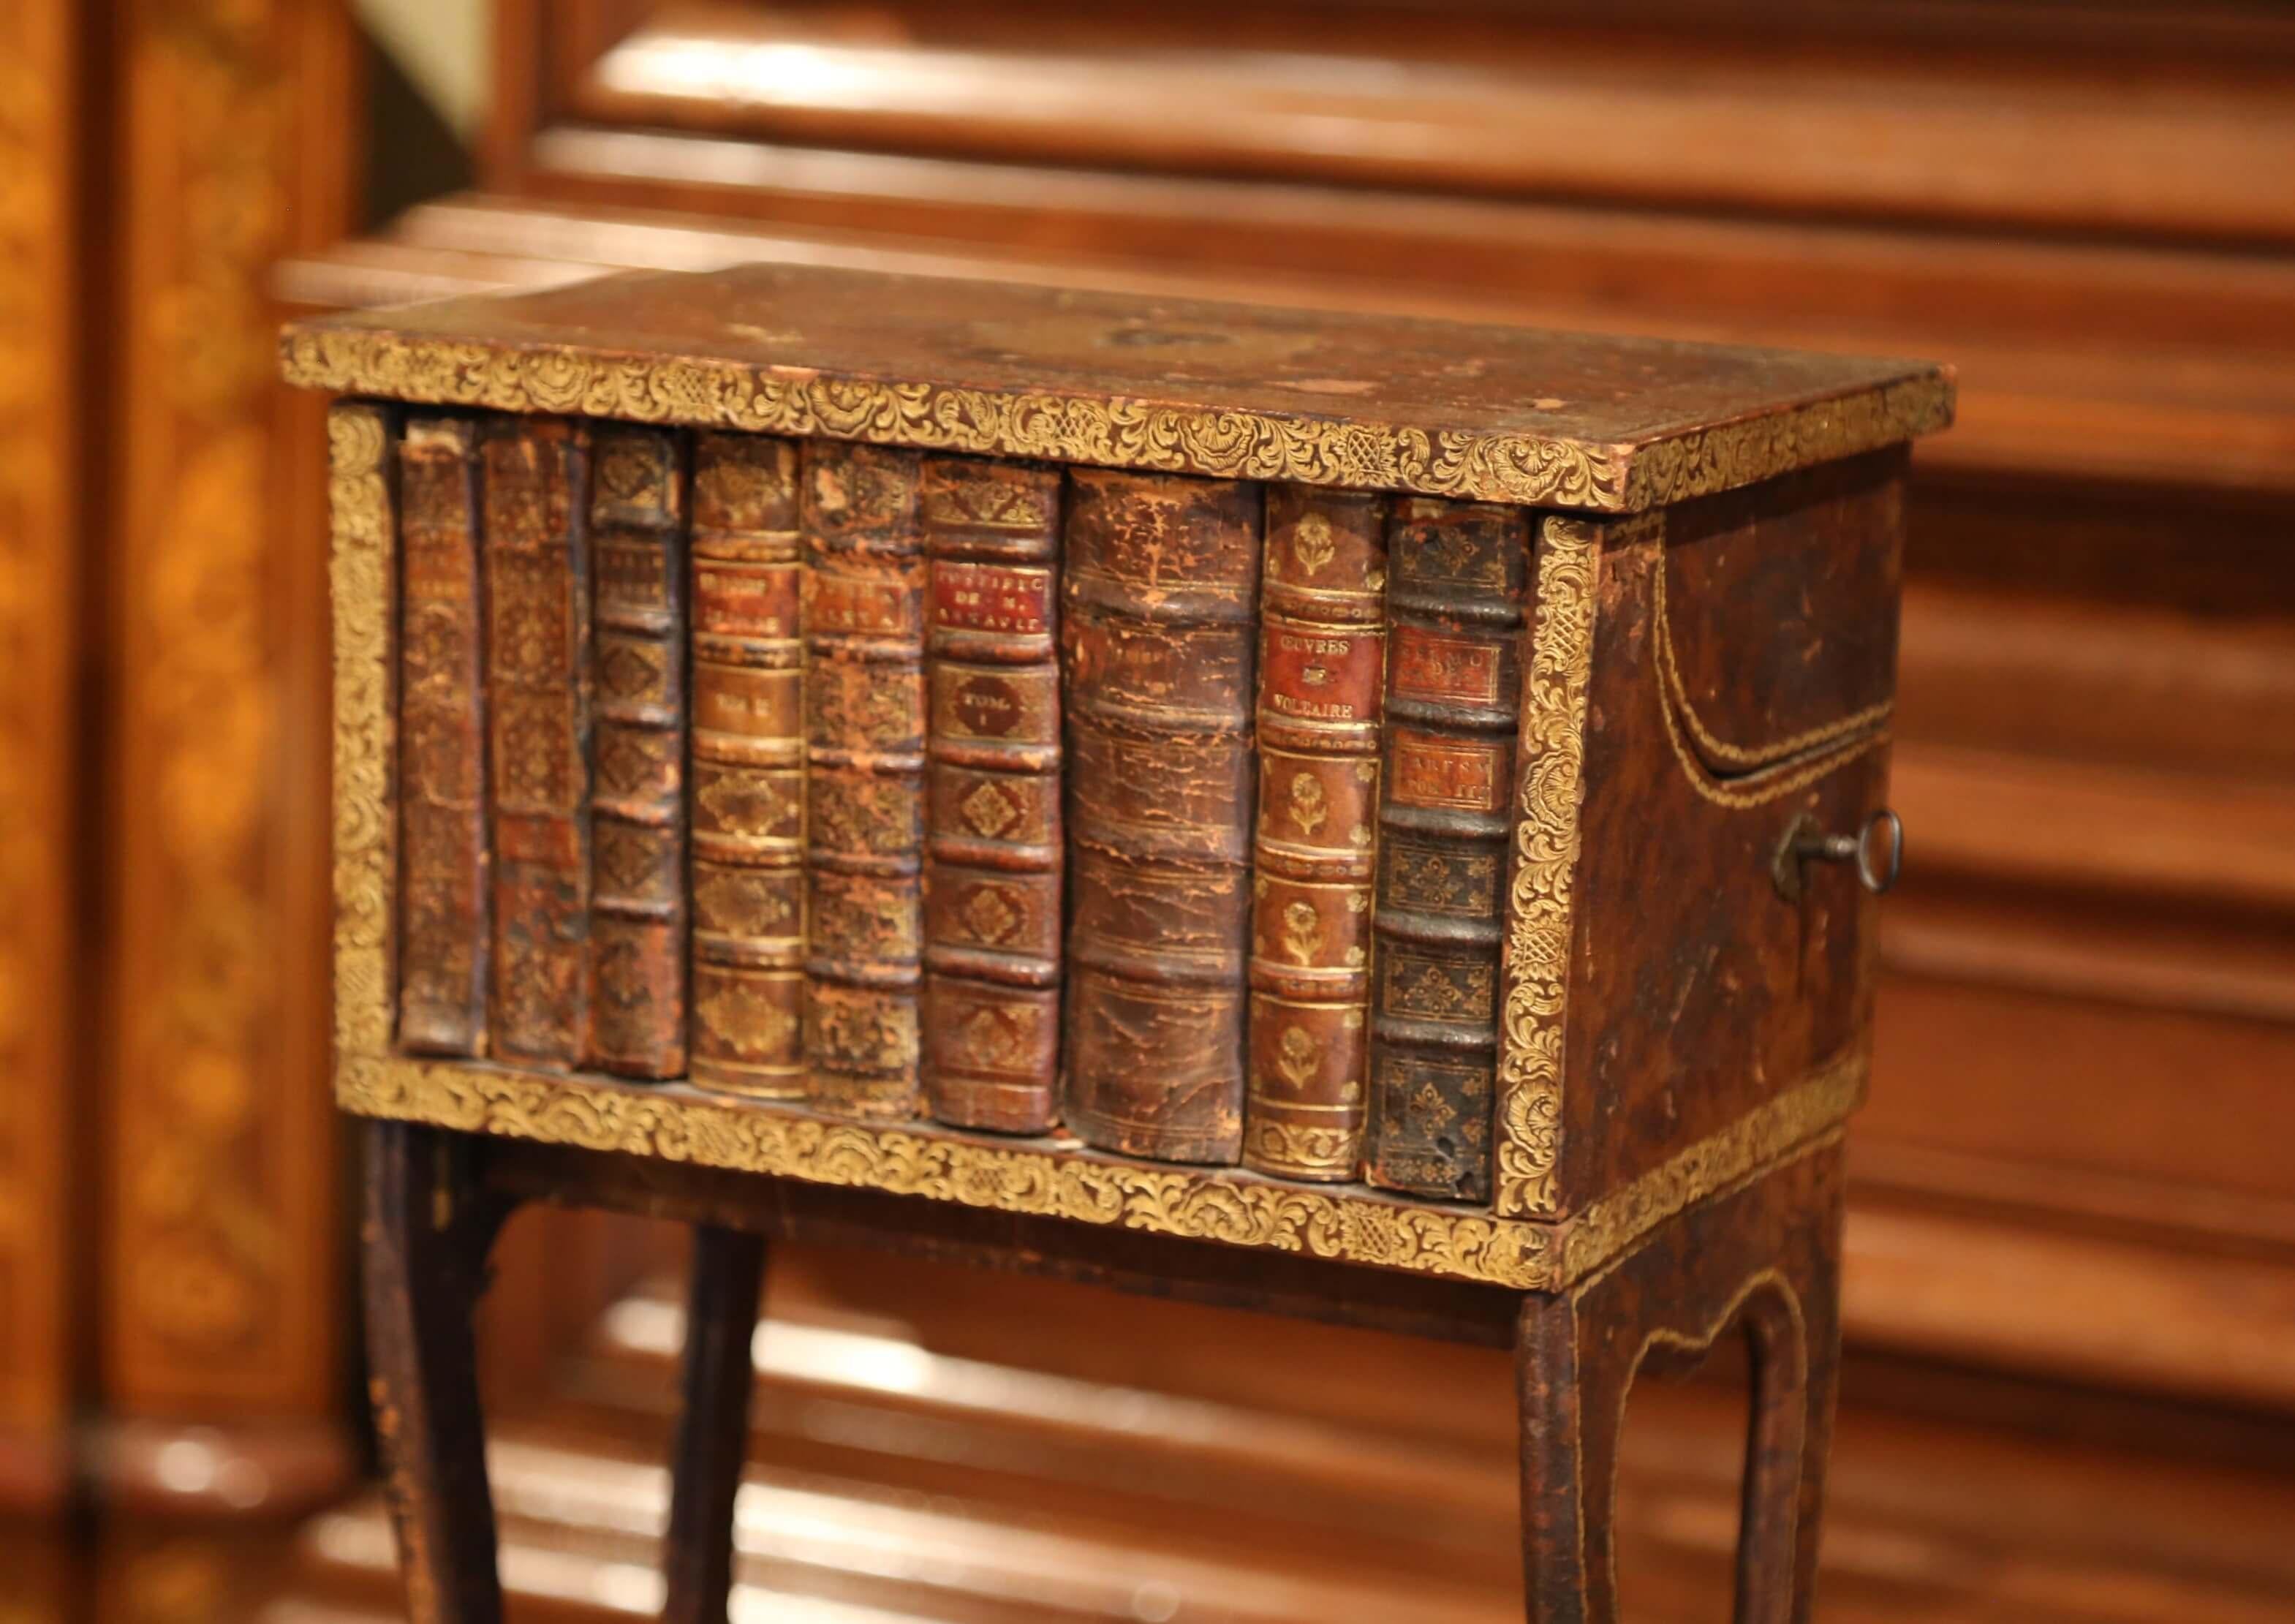 Gilt Early 19th Century French Faux Leather Bound Books Liquor Cabinet with Glasses For Sale